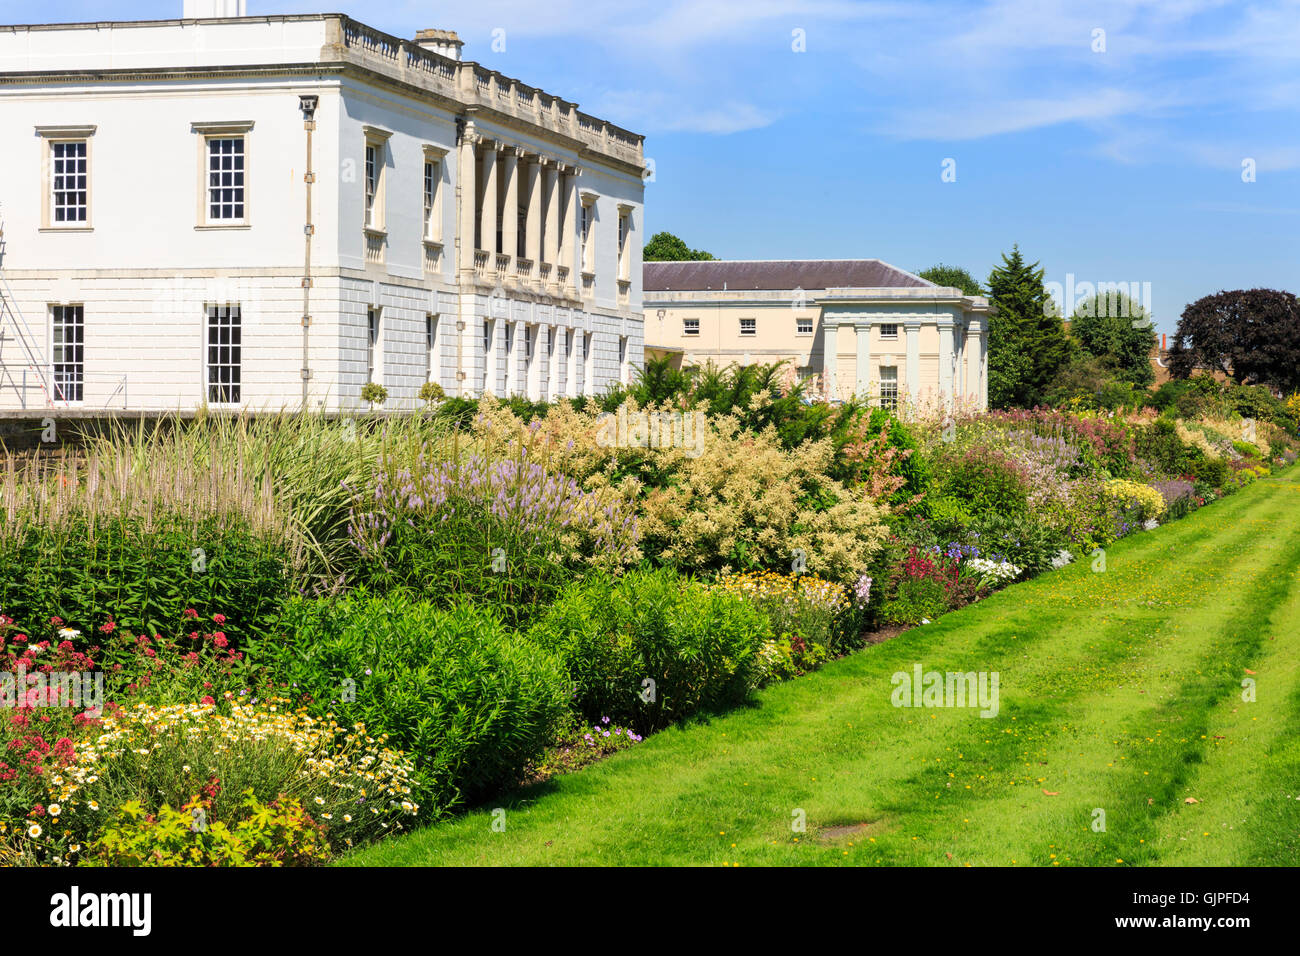 Queens House, a  restored former royal residence, Greenwich, London, England Stock Photo